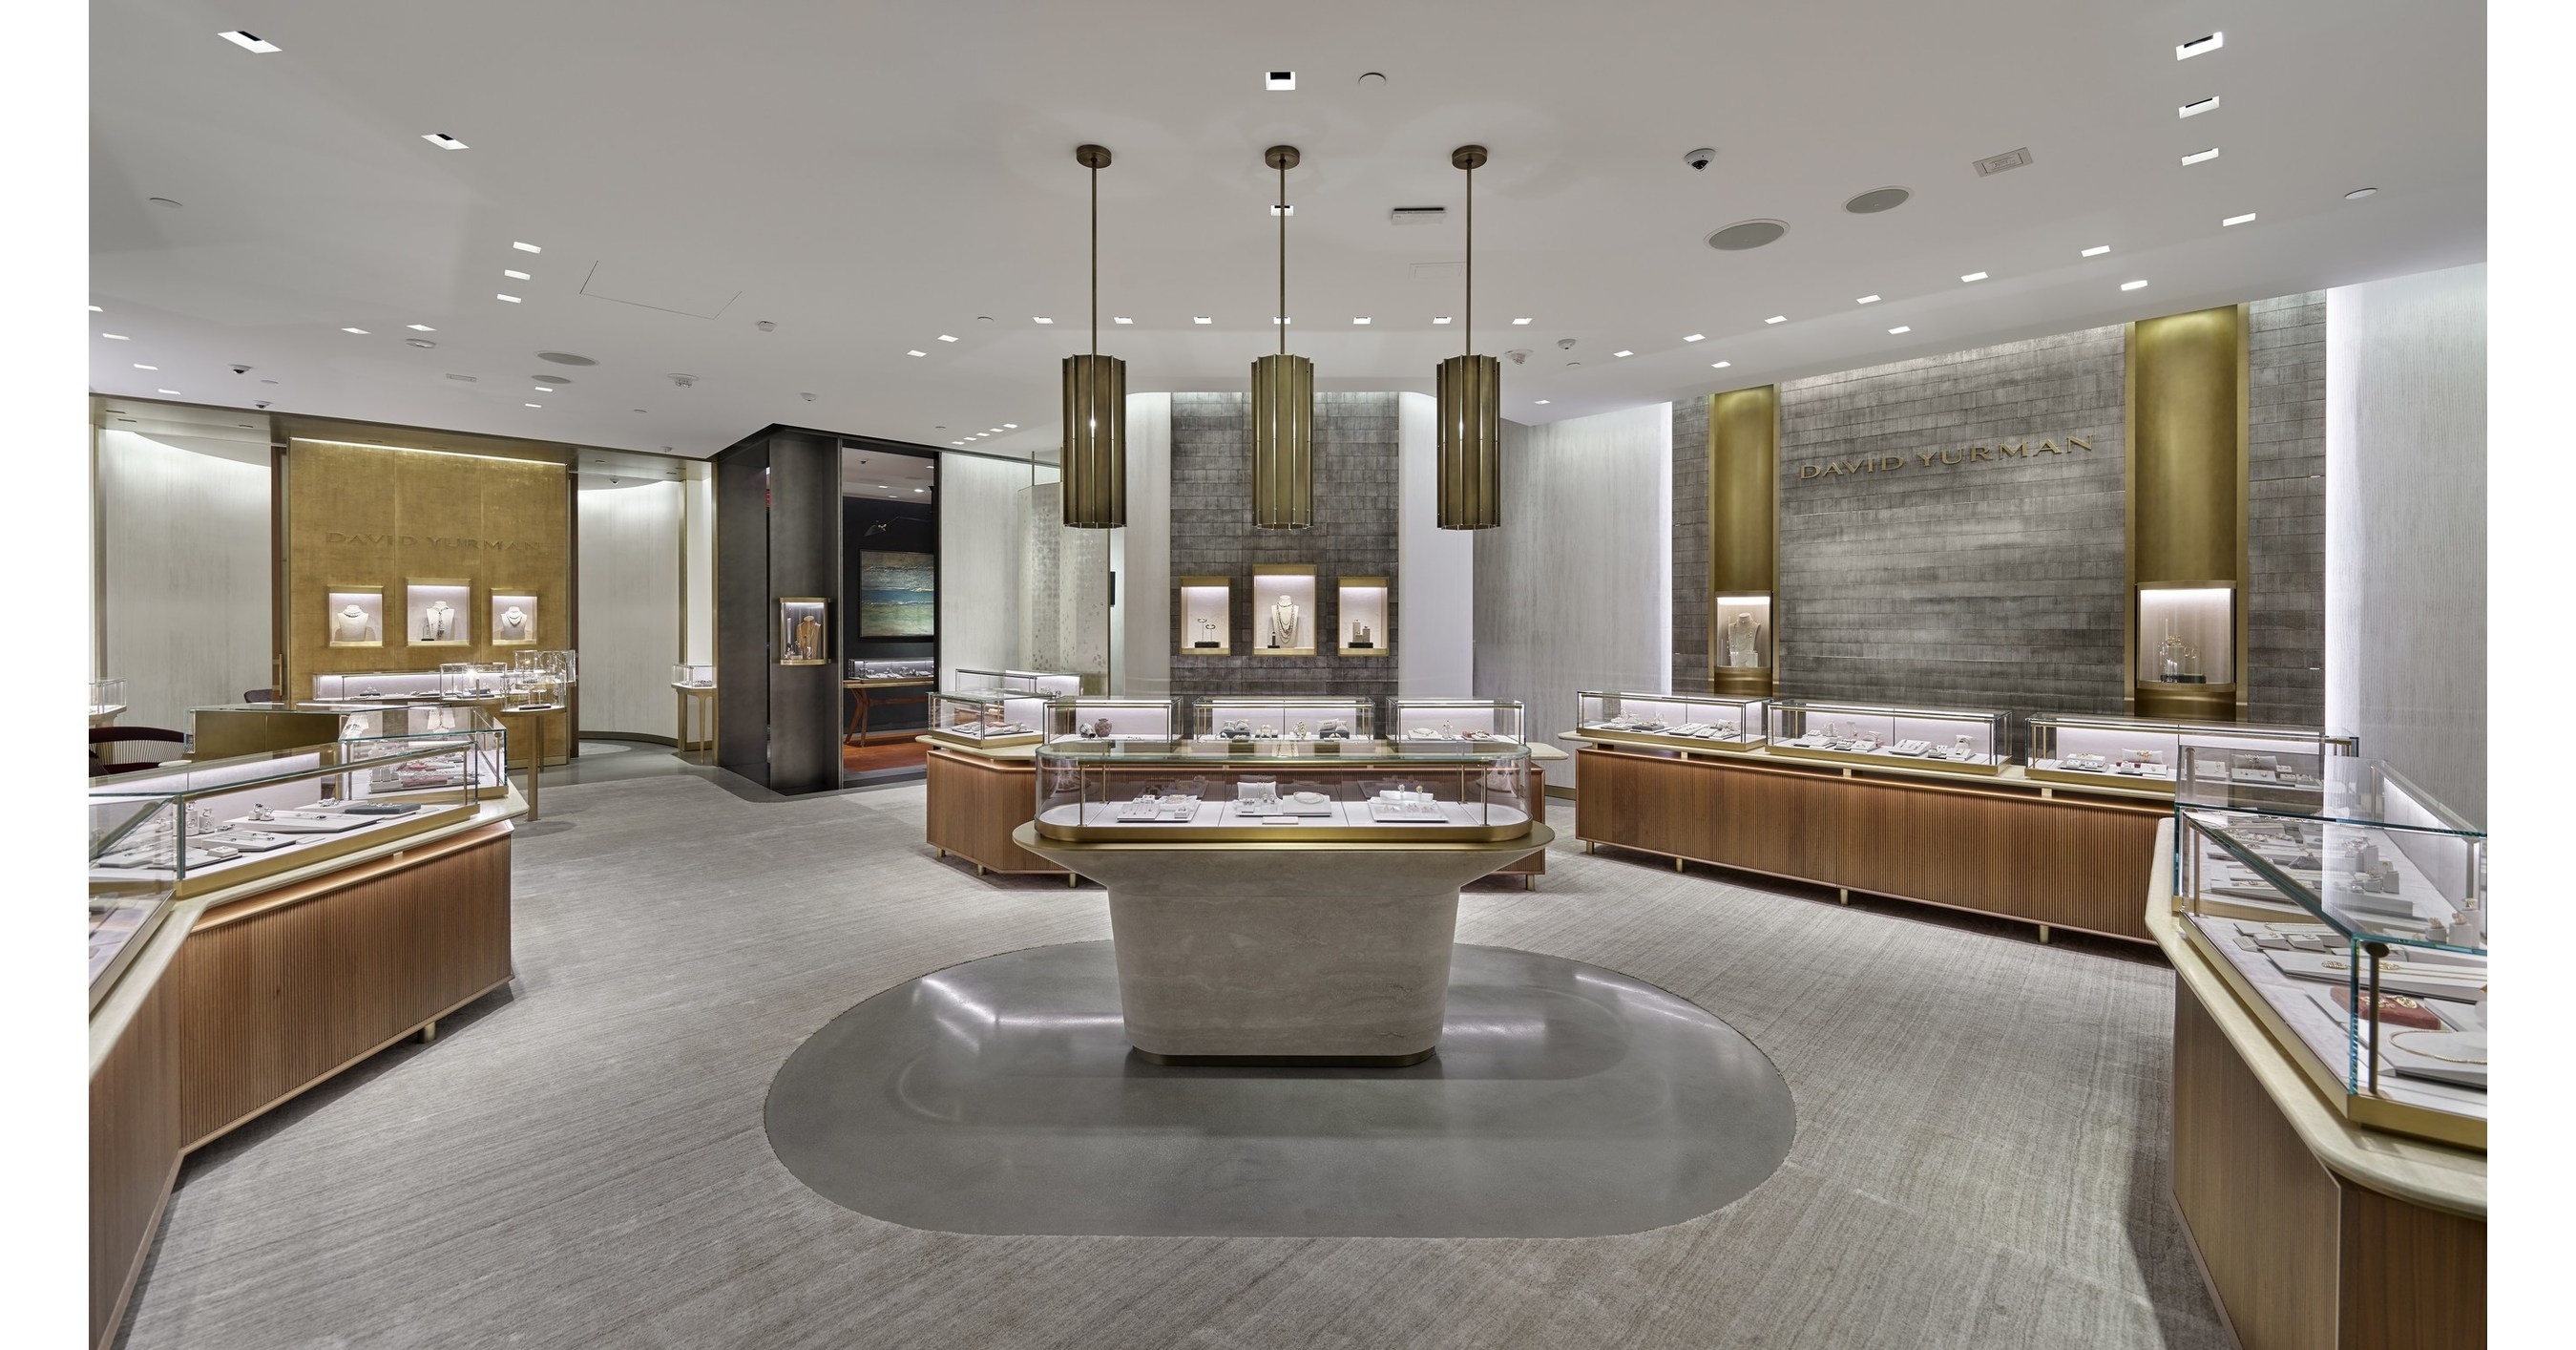 David Yurman Announces Opening Of New Store At The Mall At Short Hills